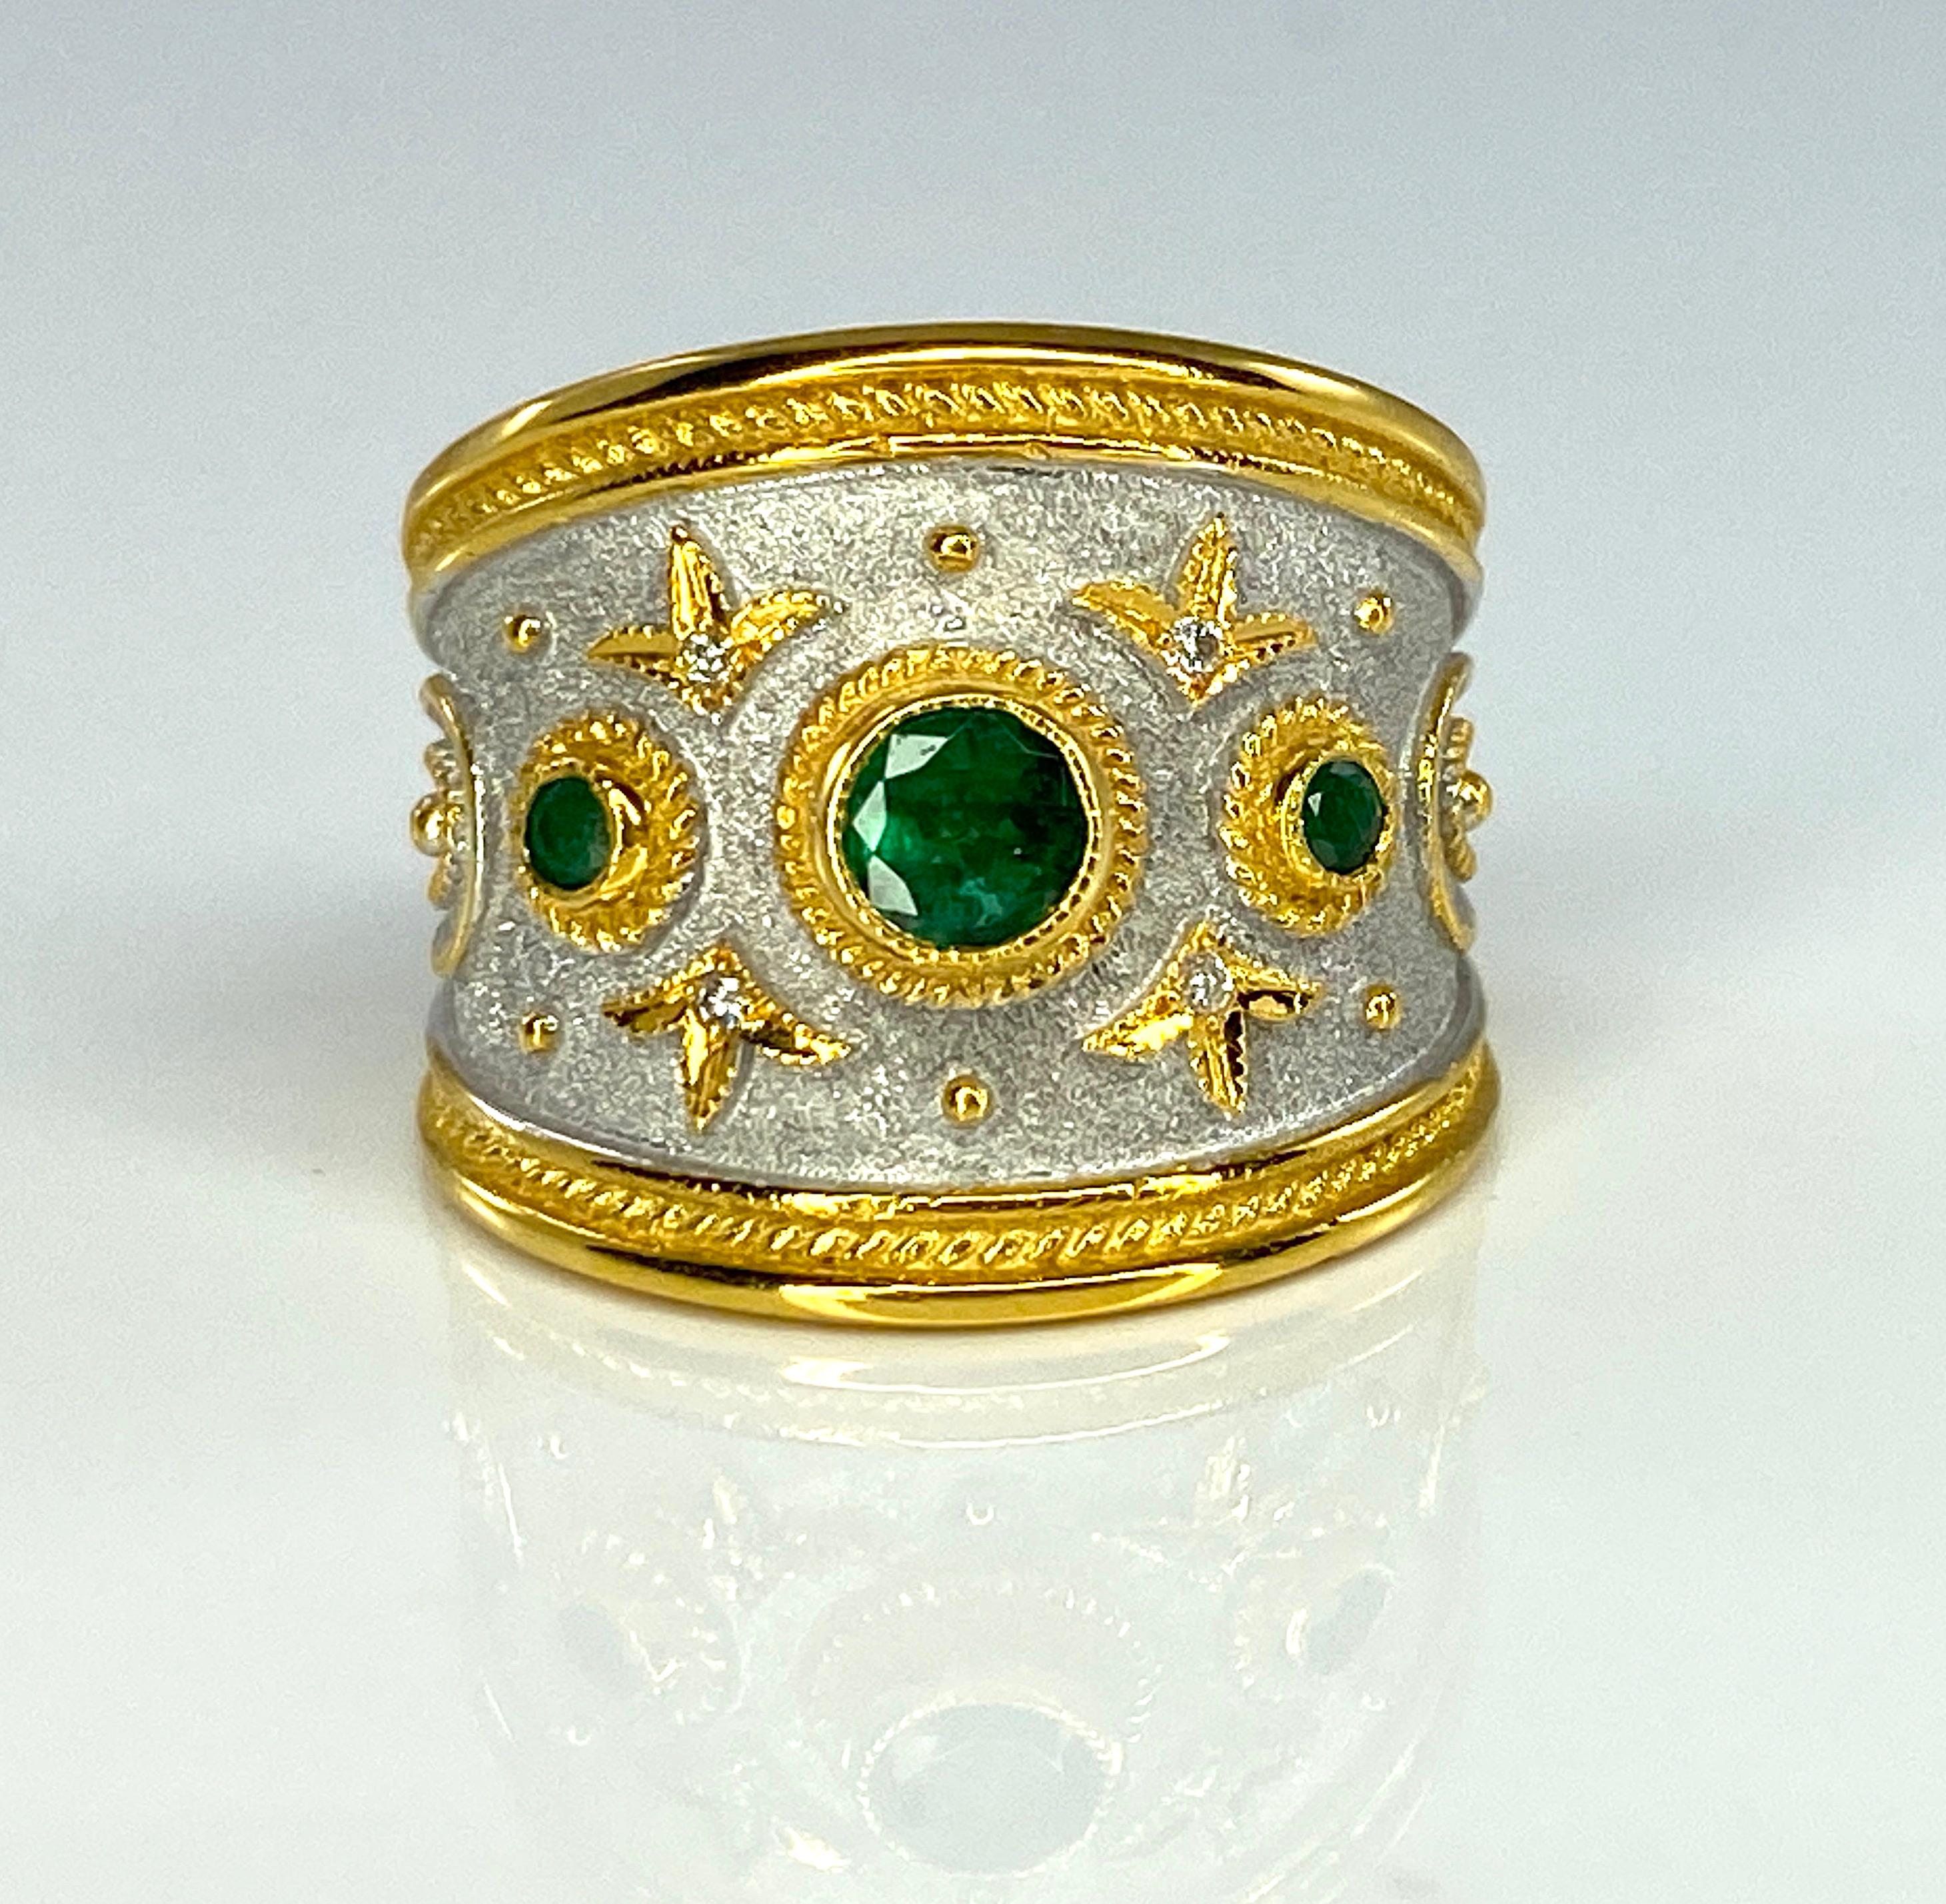 S.Georgios designer 18 Karat Yellow Gold Ring is handmade in Byzantine Style - decorated with granulation that stands out from a velvet background which is finished with White Rhodium. The ring features 3 Brilliant cut Emeralds with a total weight